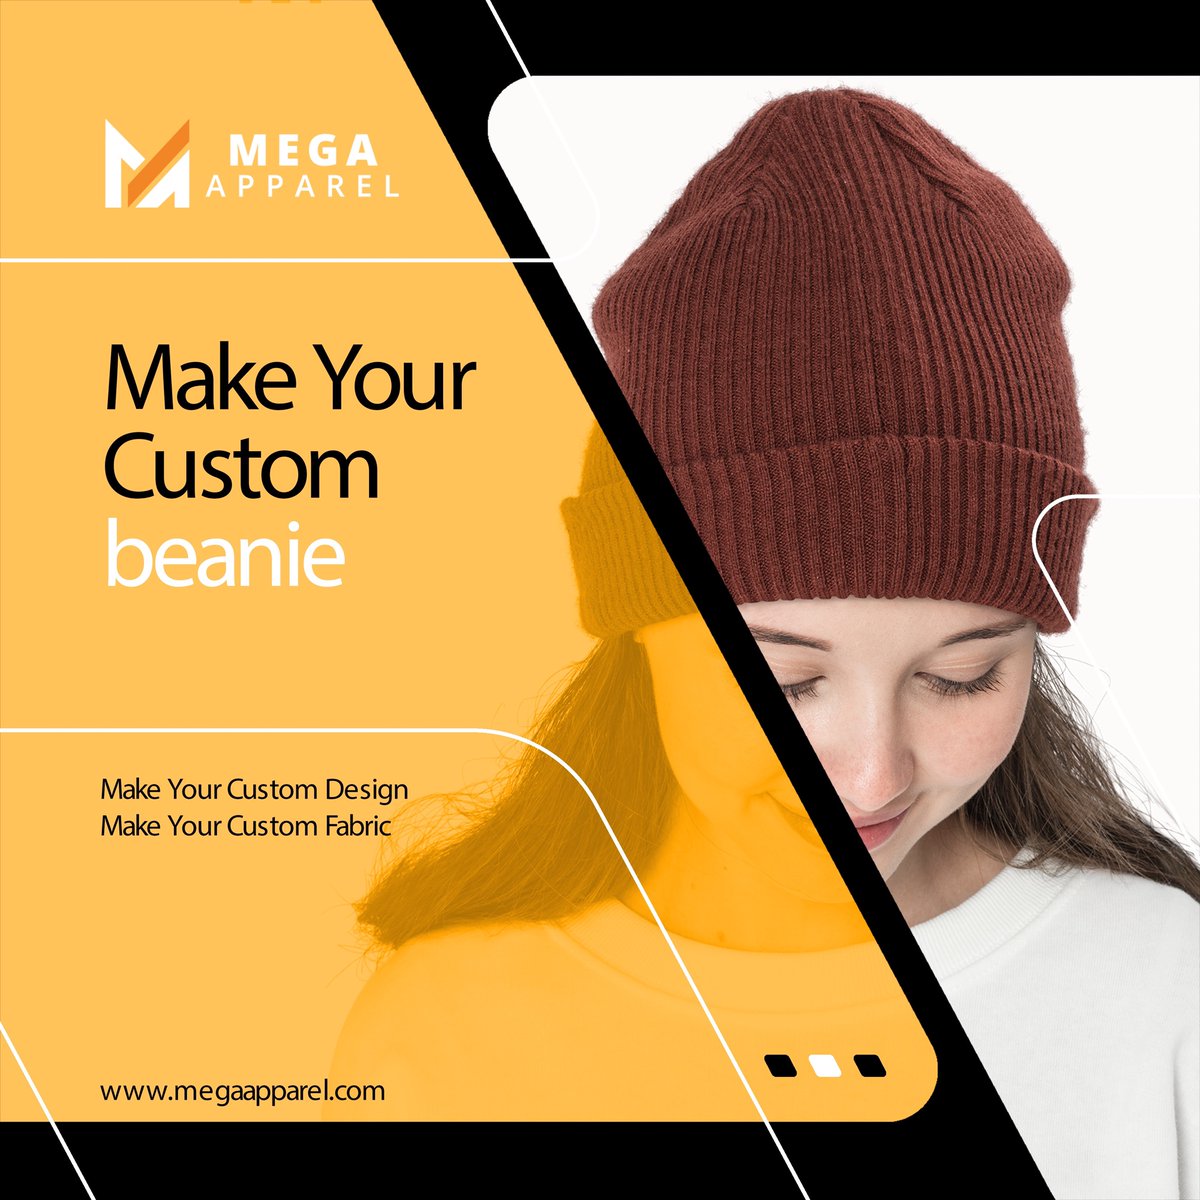 Our custom beanies come in various styles. The dedicated technicians will work with you to make sure every detail is just right before producing your final proof for production. 

☎️  +1-805-468-8395
📧   Info@megaapparel.com

megaapparel.com/beanie-manufac…

#custombeanie #beanies